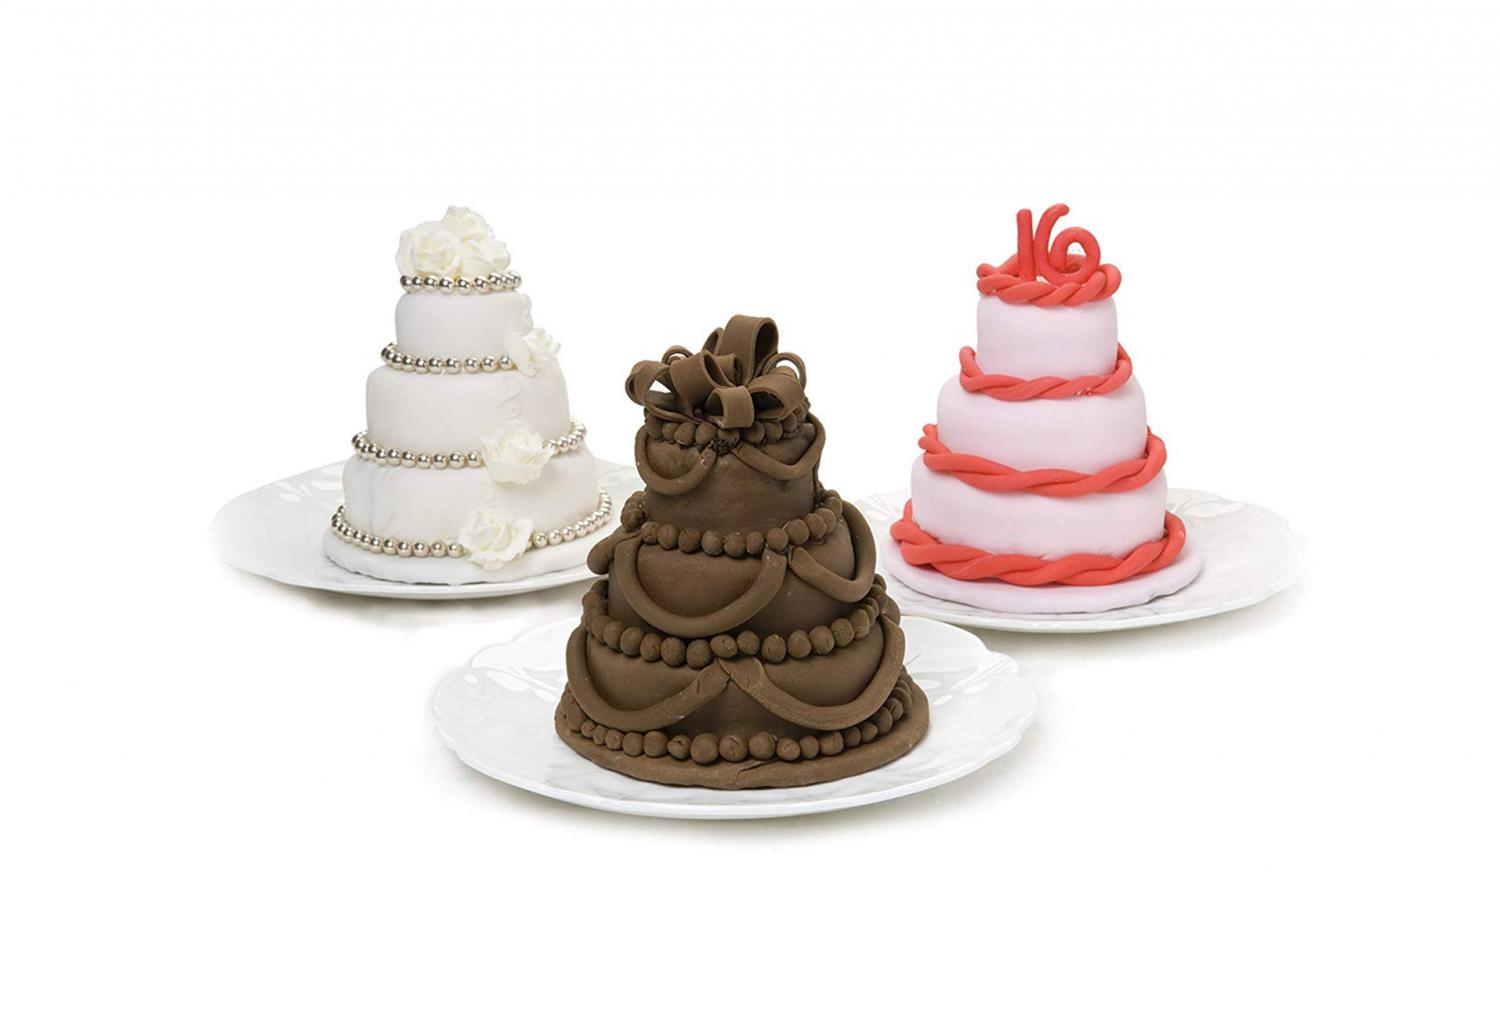 4 CAVITY 3 TIERED SILICONE CAKE MOLD MAKES 4 MINI 3 TIERED CAKES AT THE SAME T 